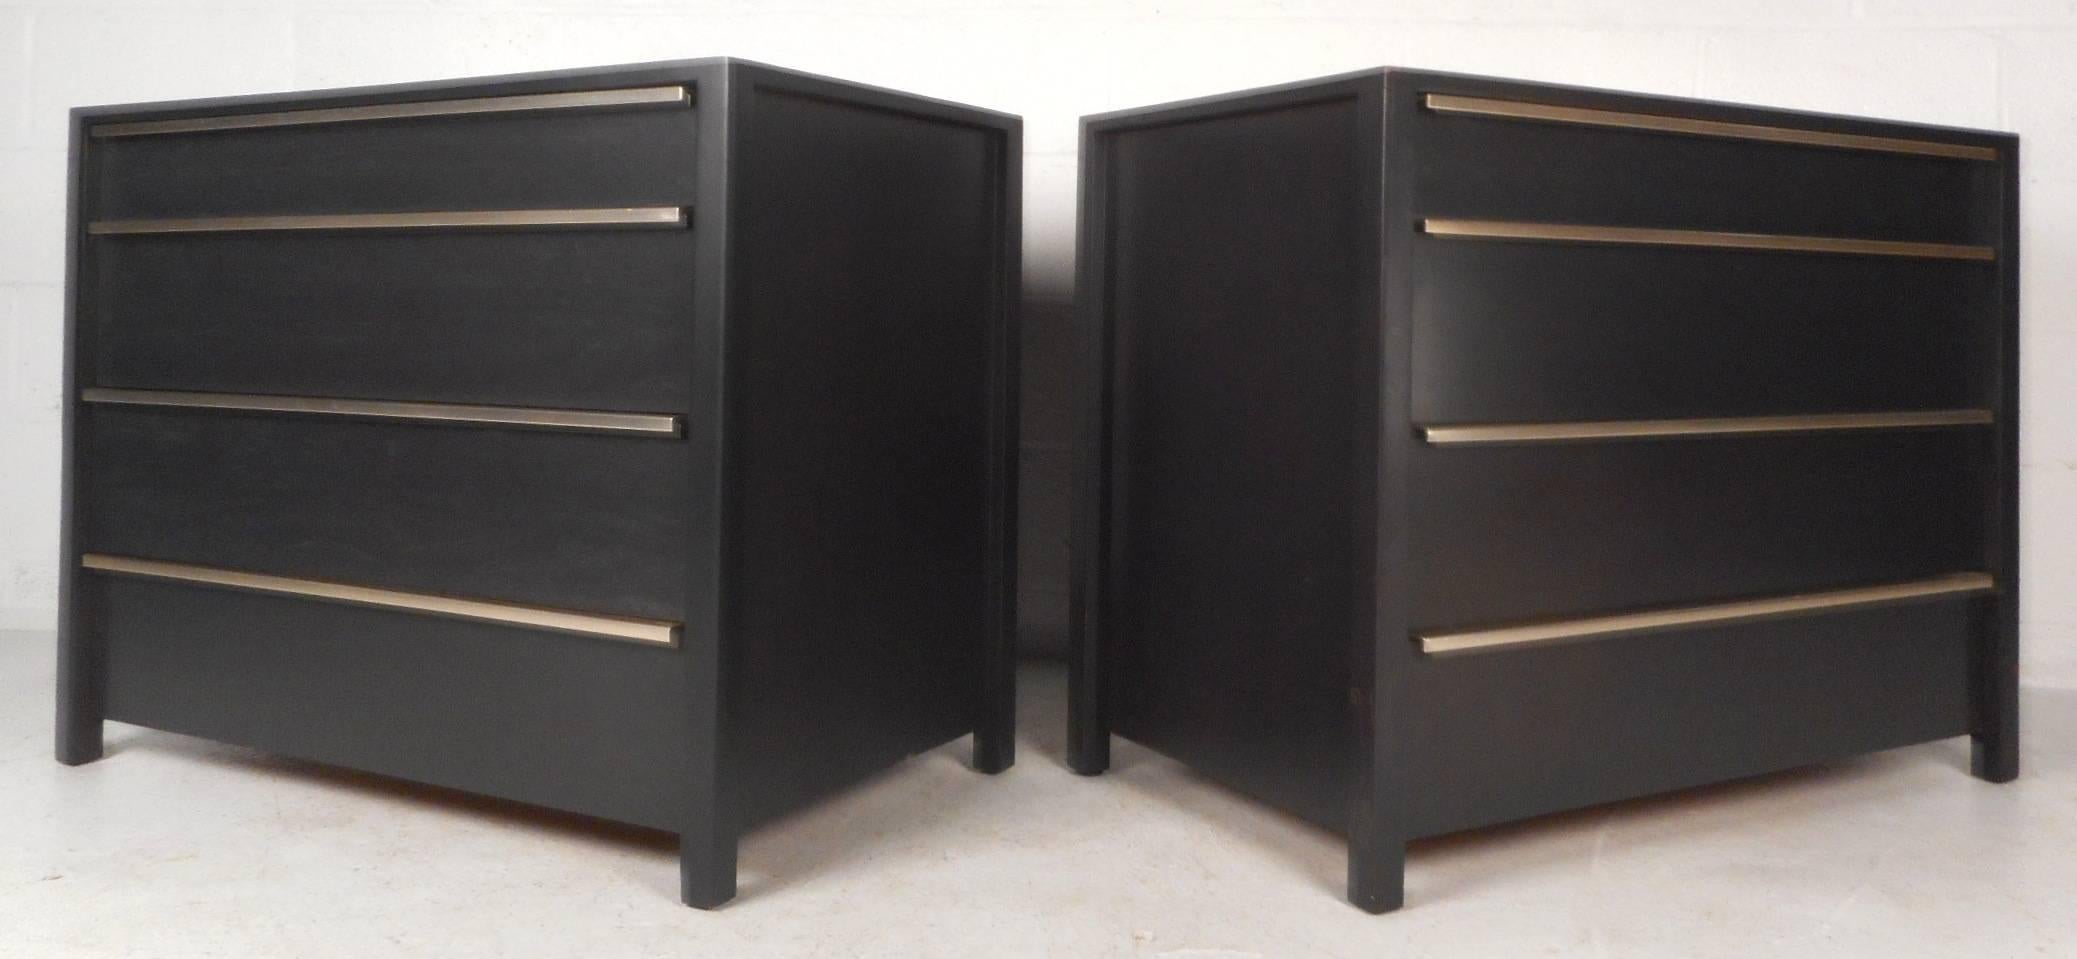 This gorgeous pair of vintage modern dressers feature unique metal pulls that stretch across the top of each drawer. Sleek design with an elegant ebonized finish and raised edges along each side. This stunning pair has eight hefty drawers ensuring